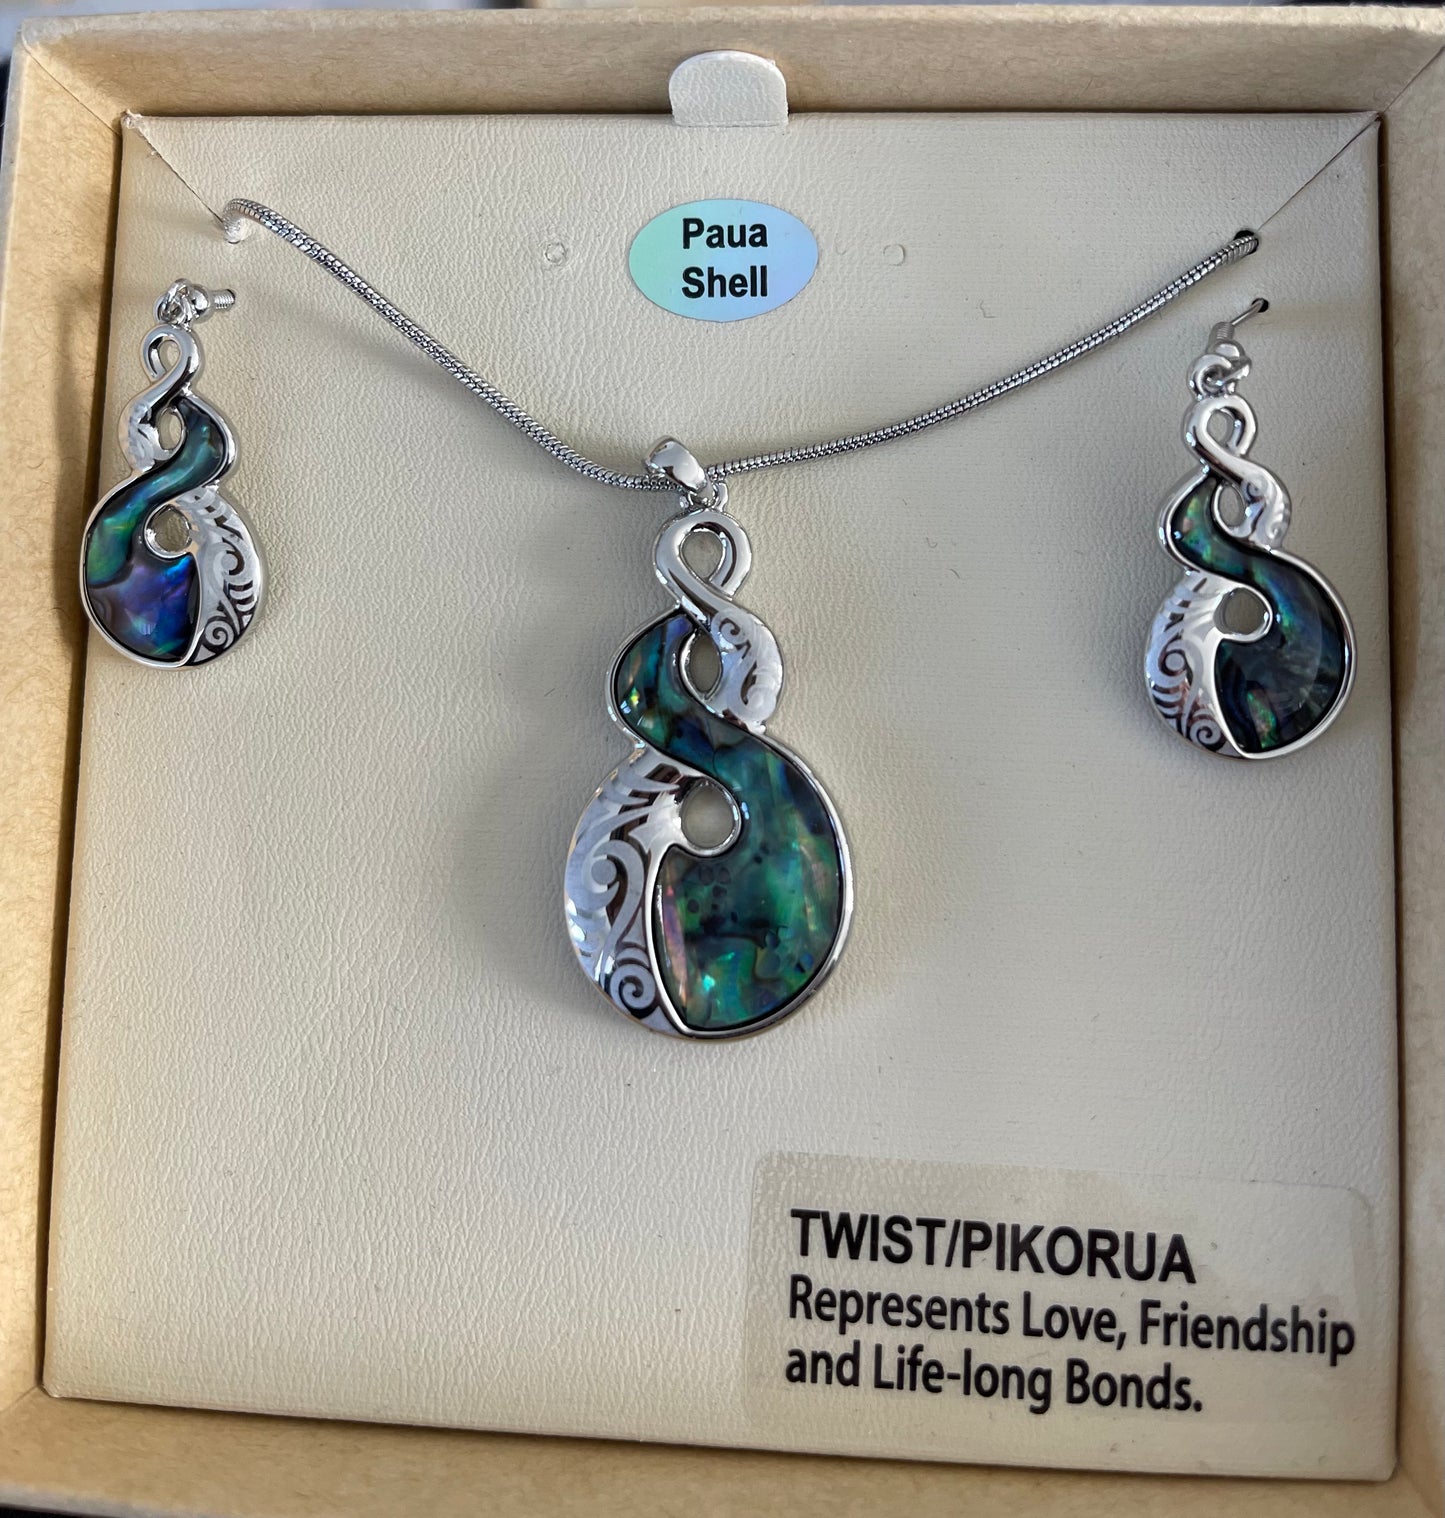 Paua Twist Necklace and Earrings